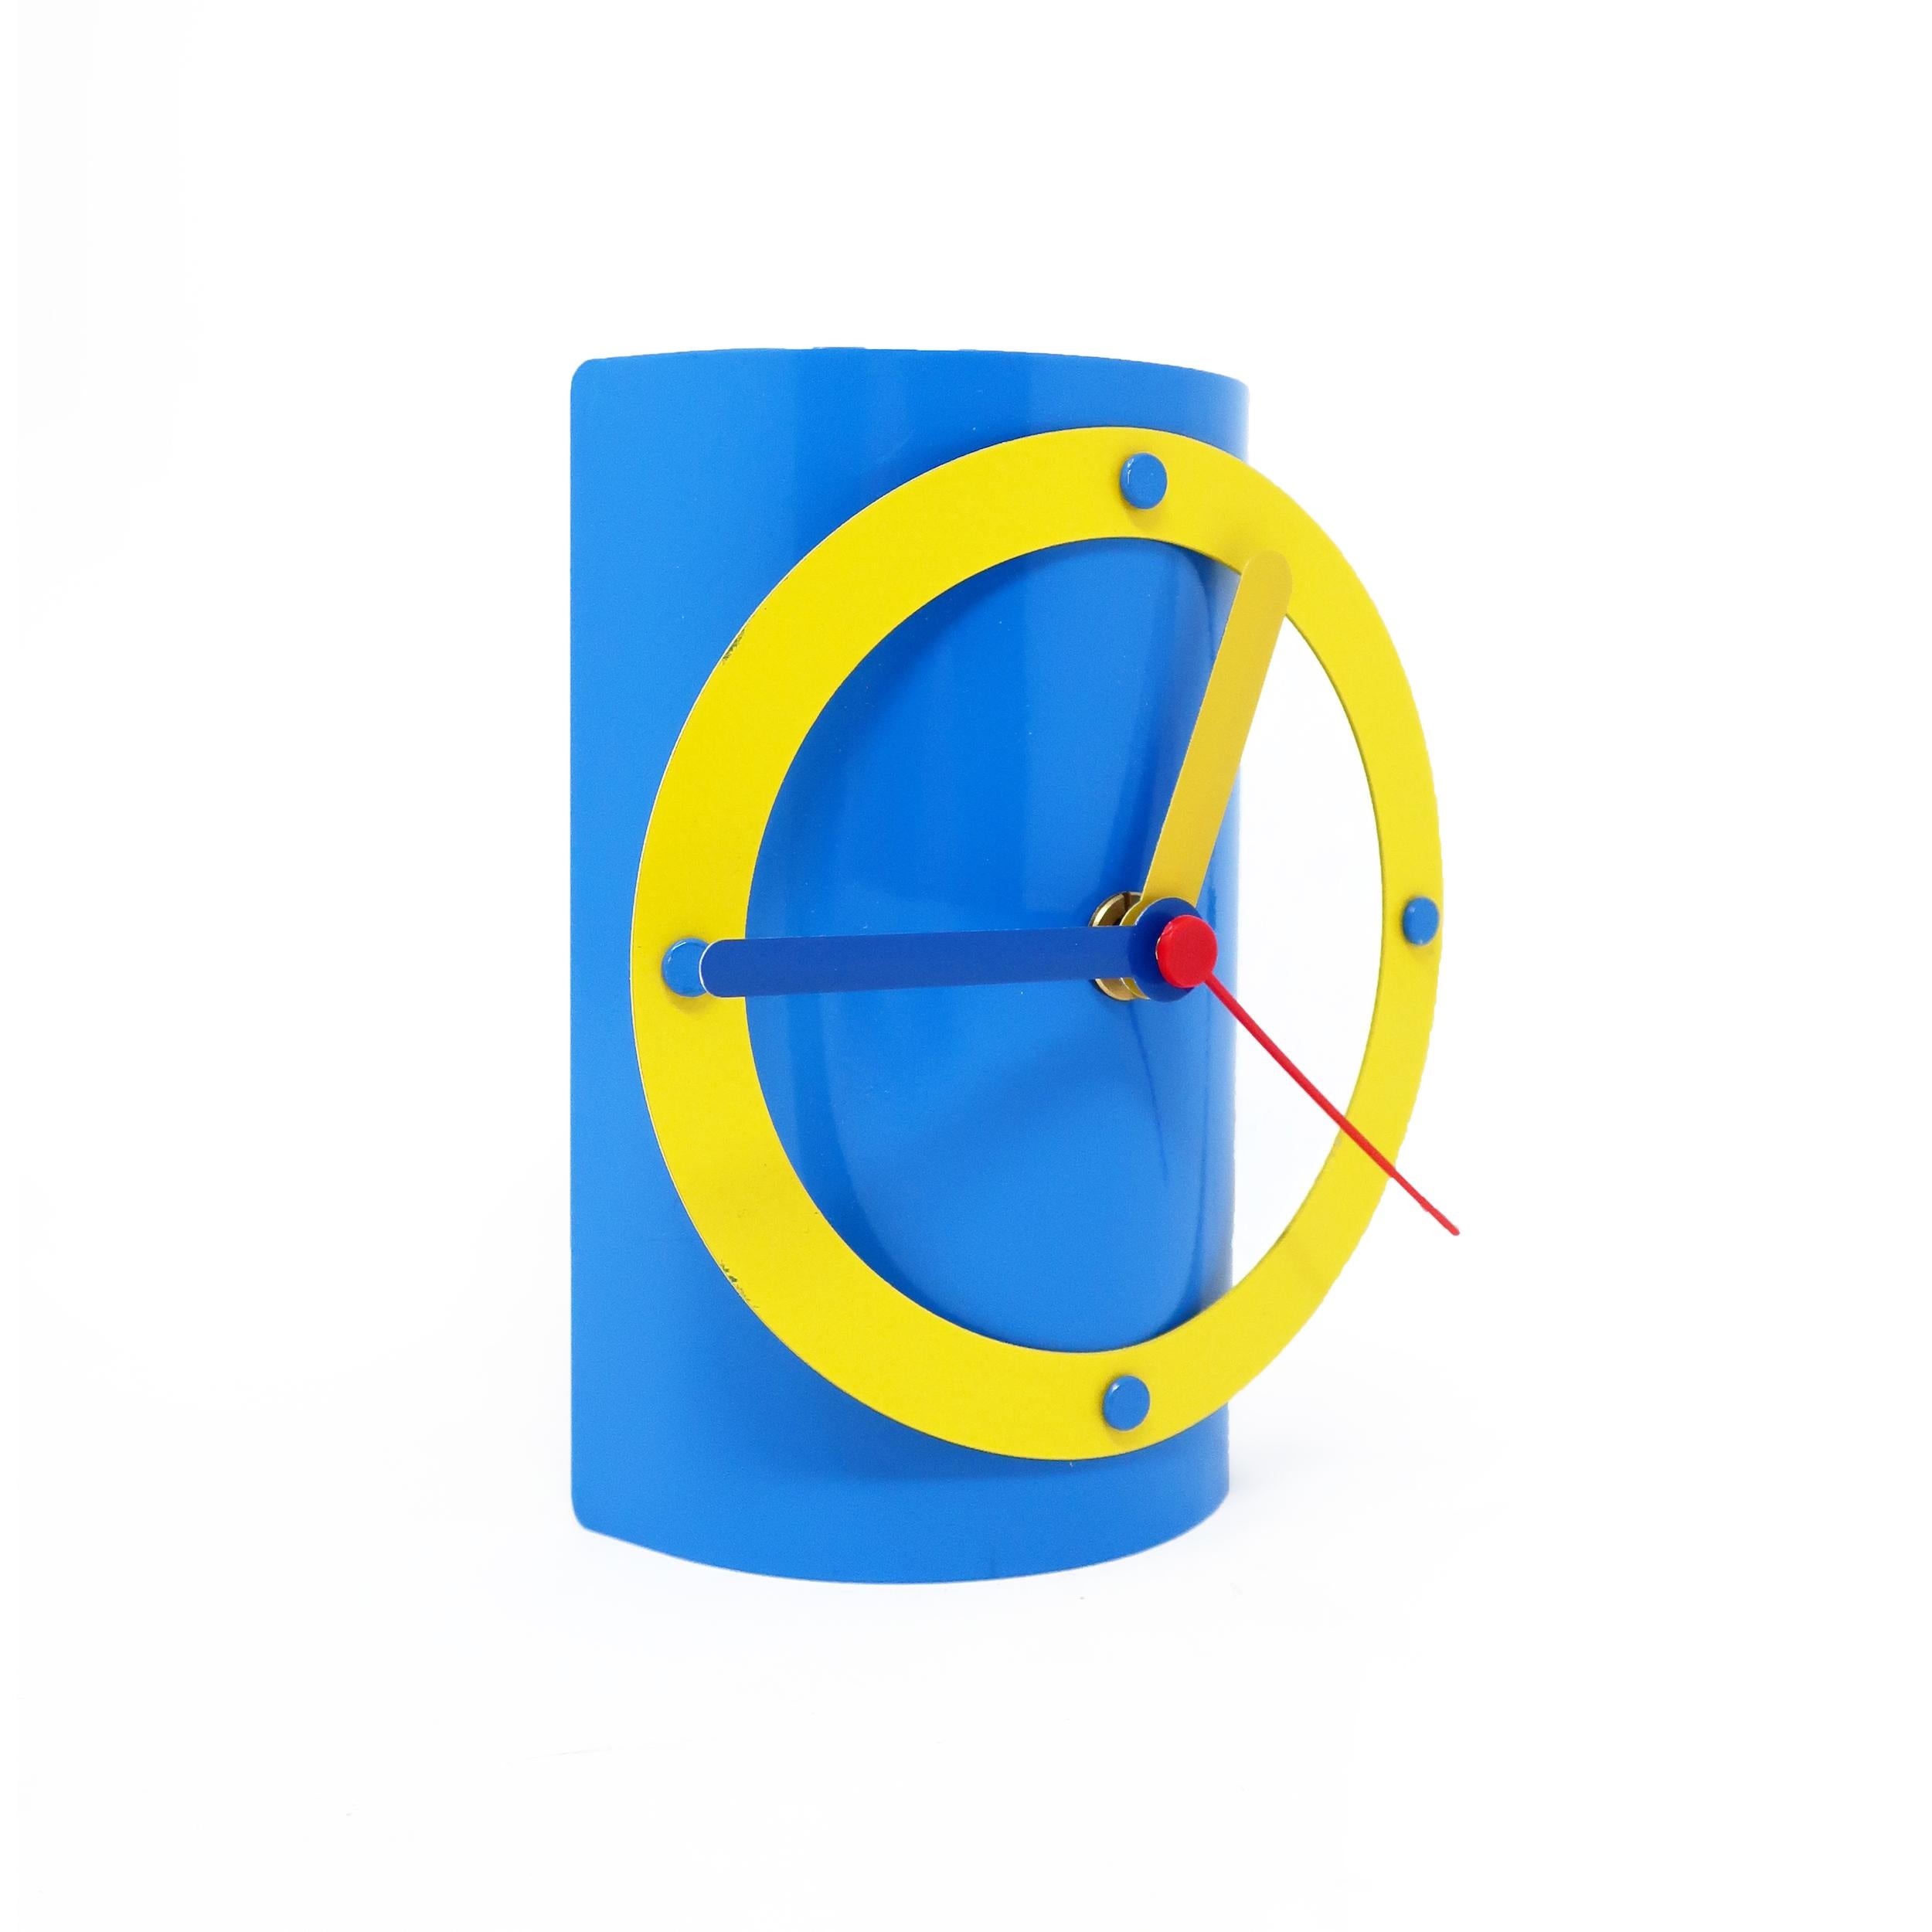 A postmodern desk or table clock by Time Square. This 